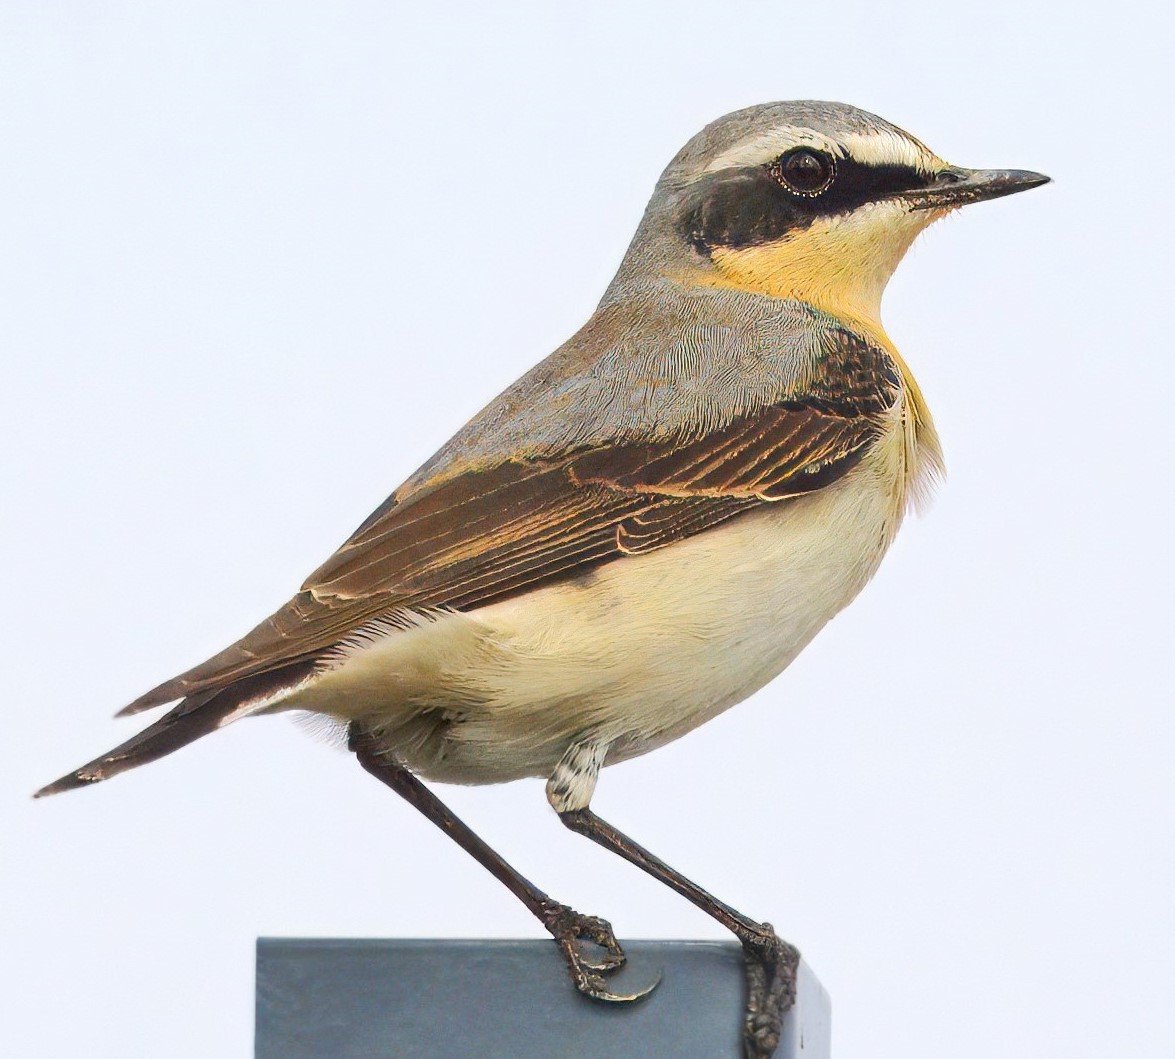 1 of the 2 Wheatears at Orgreave this afternoon.